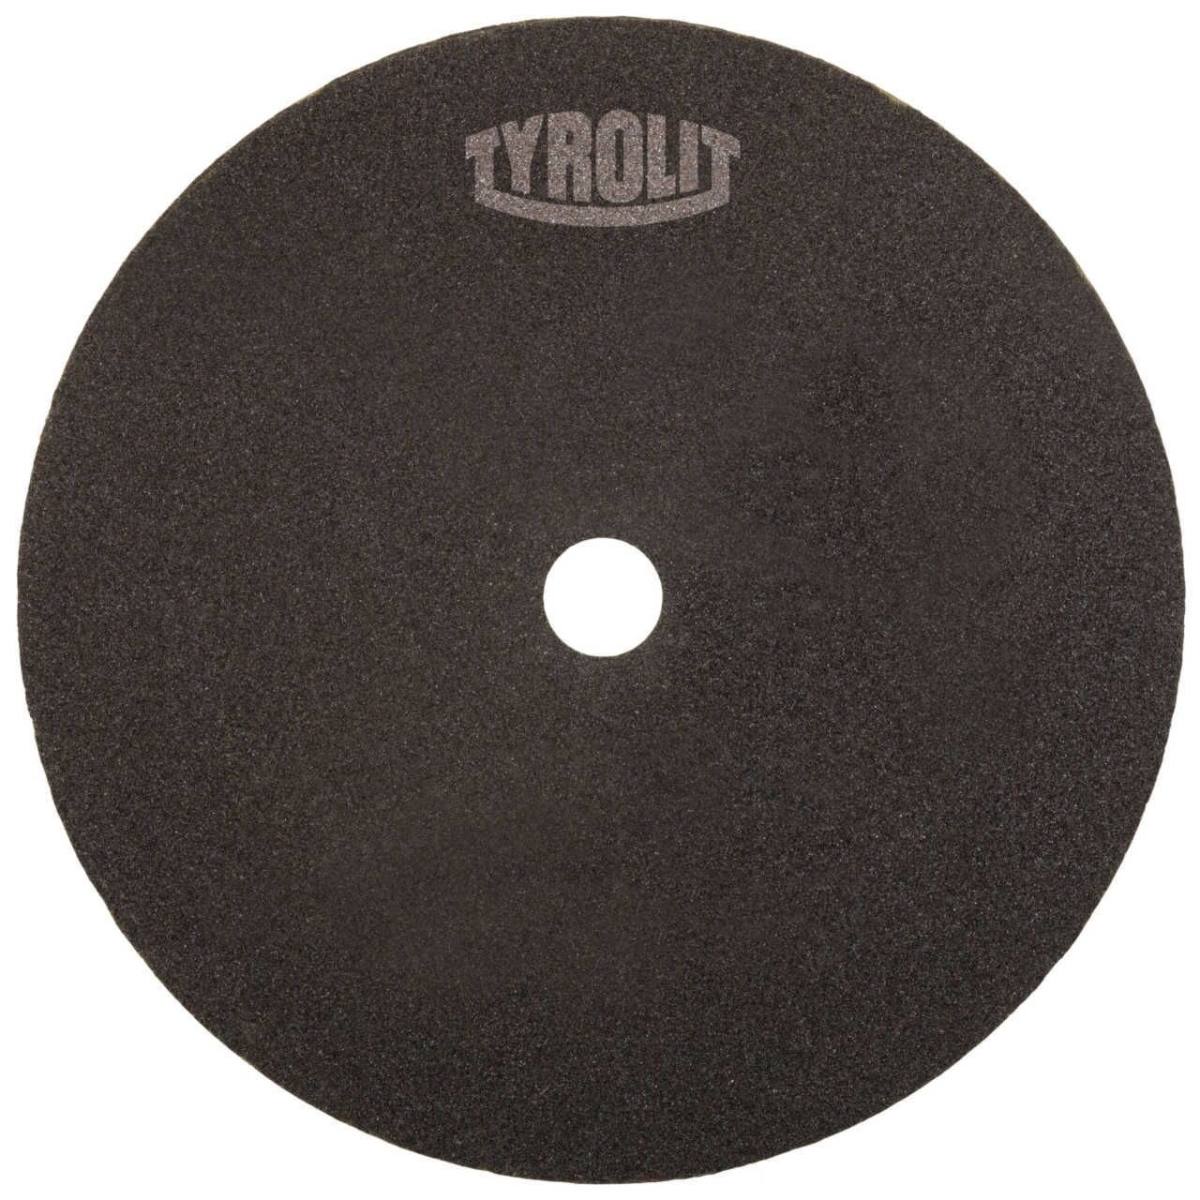 Tyrolit Cutting disc for cutting and saw sharpening DxDxH 175x3x51 For steel and HSS, shape: 41N - straight version (non-woven cutting disc), Art. 607744